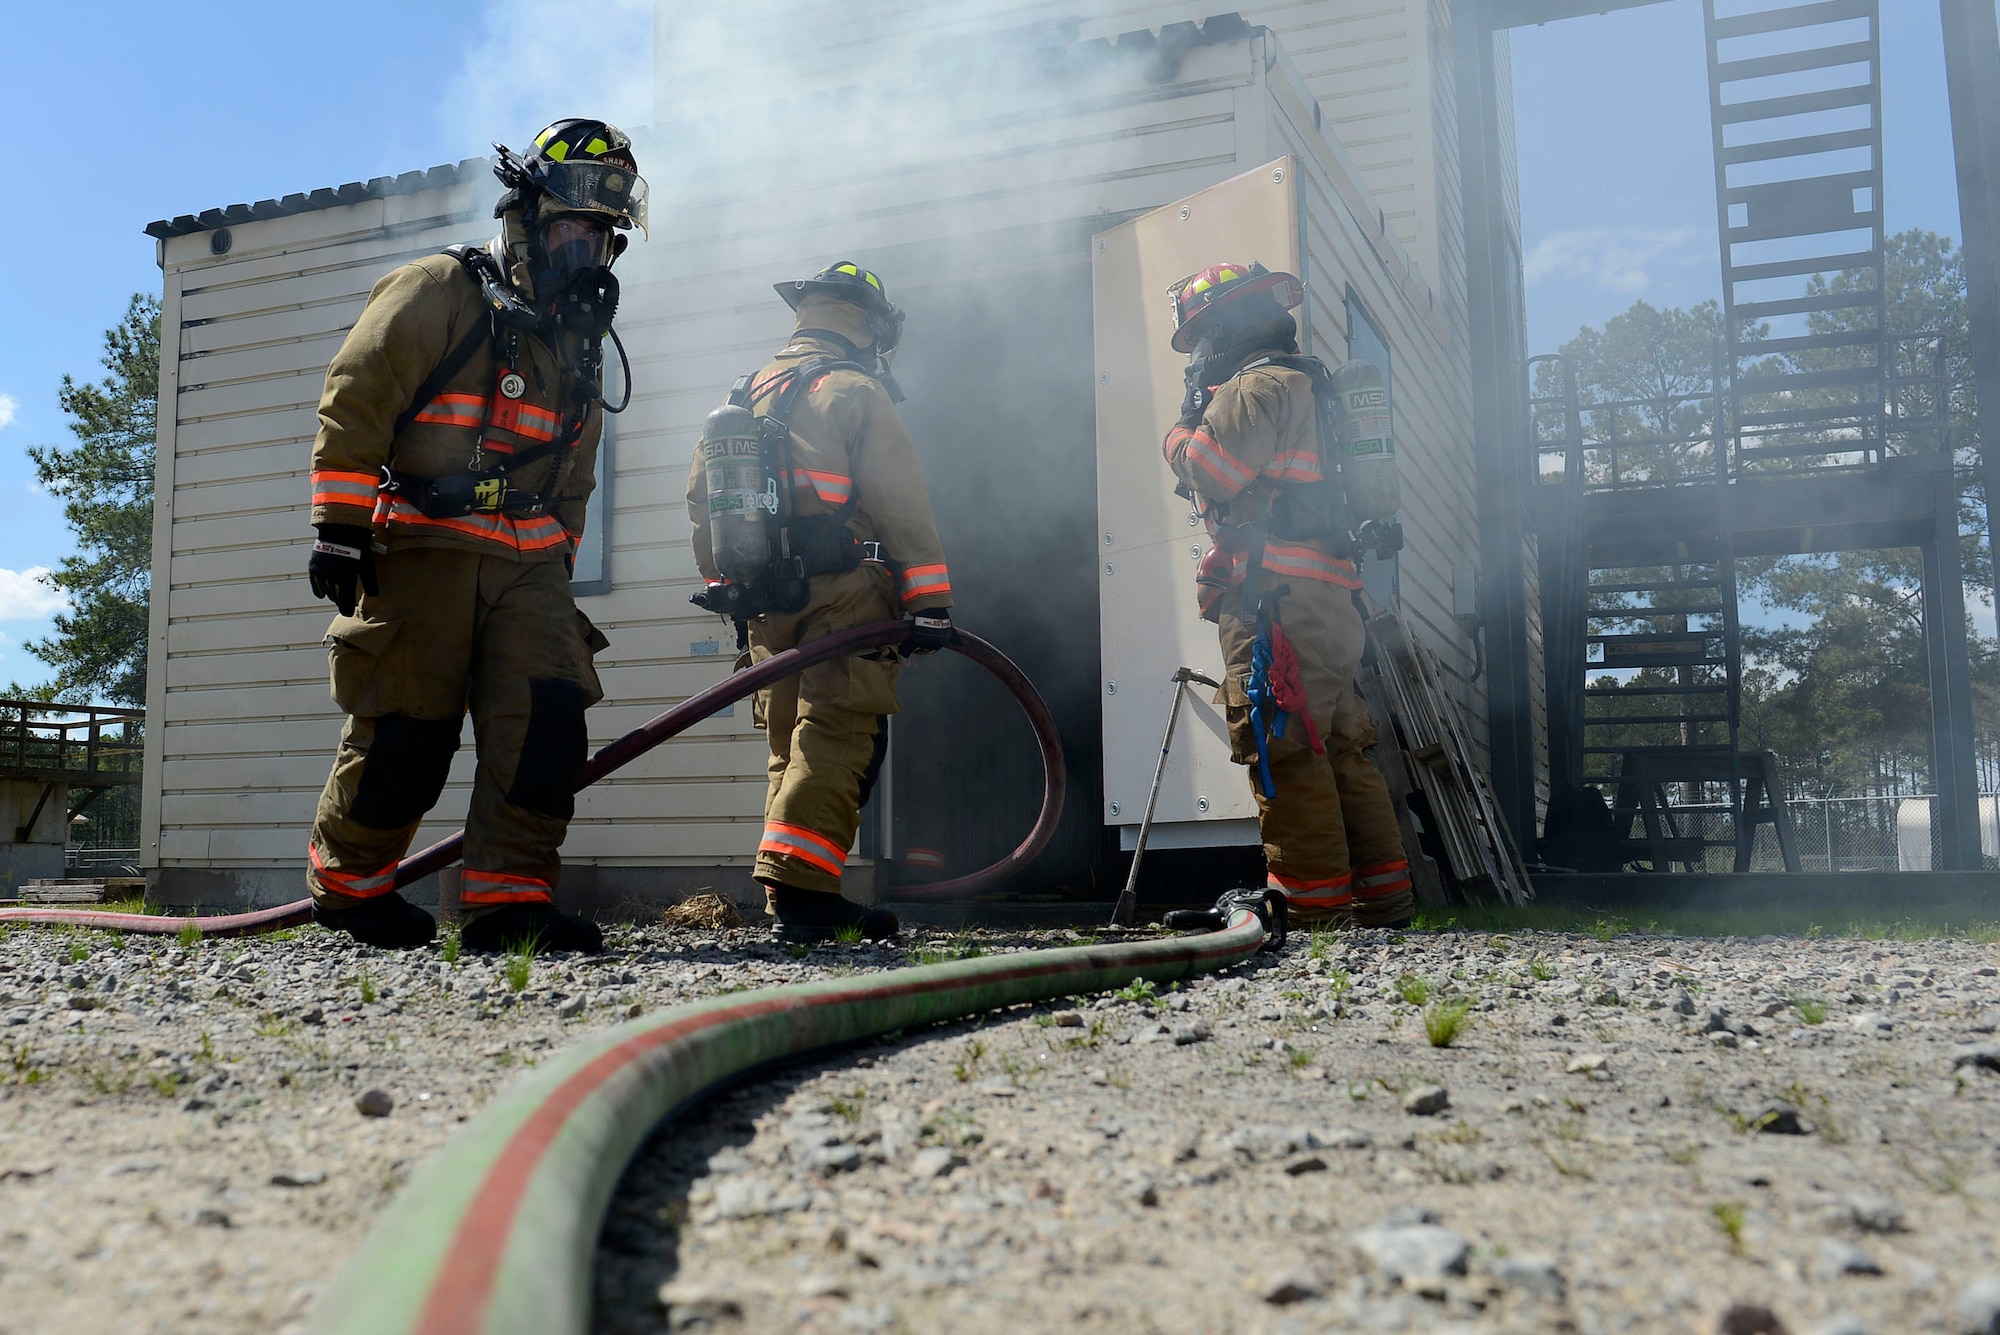 U.S. Airmen assigned to the 20th Civil Engineer Squadron fire department prepare to clear smoke from a training burn house at Shaw Air Force Base, S.C., March 14, 2016. Airmen assigned to the 20th CES utilize the burn house to practice procedures for extracting victims in a building fire scenario. (U.S. Air Force photo by Airman 1st Class Christopher Maldonado)